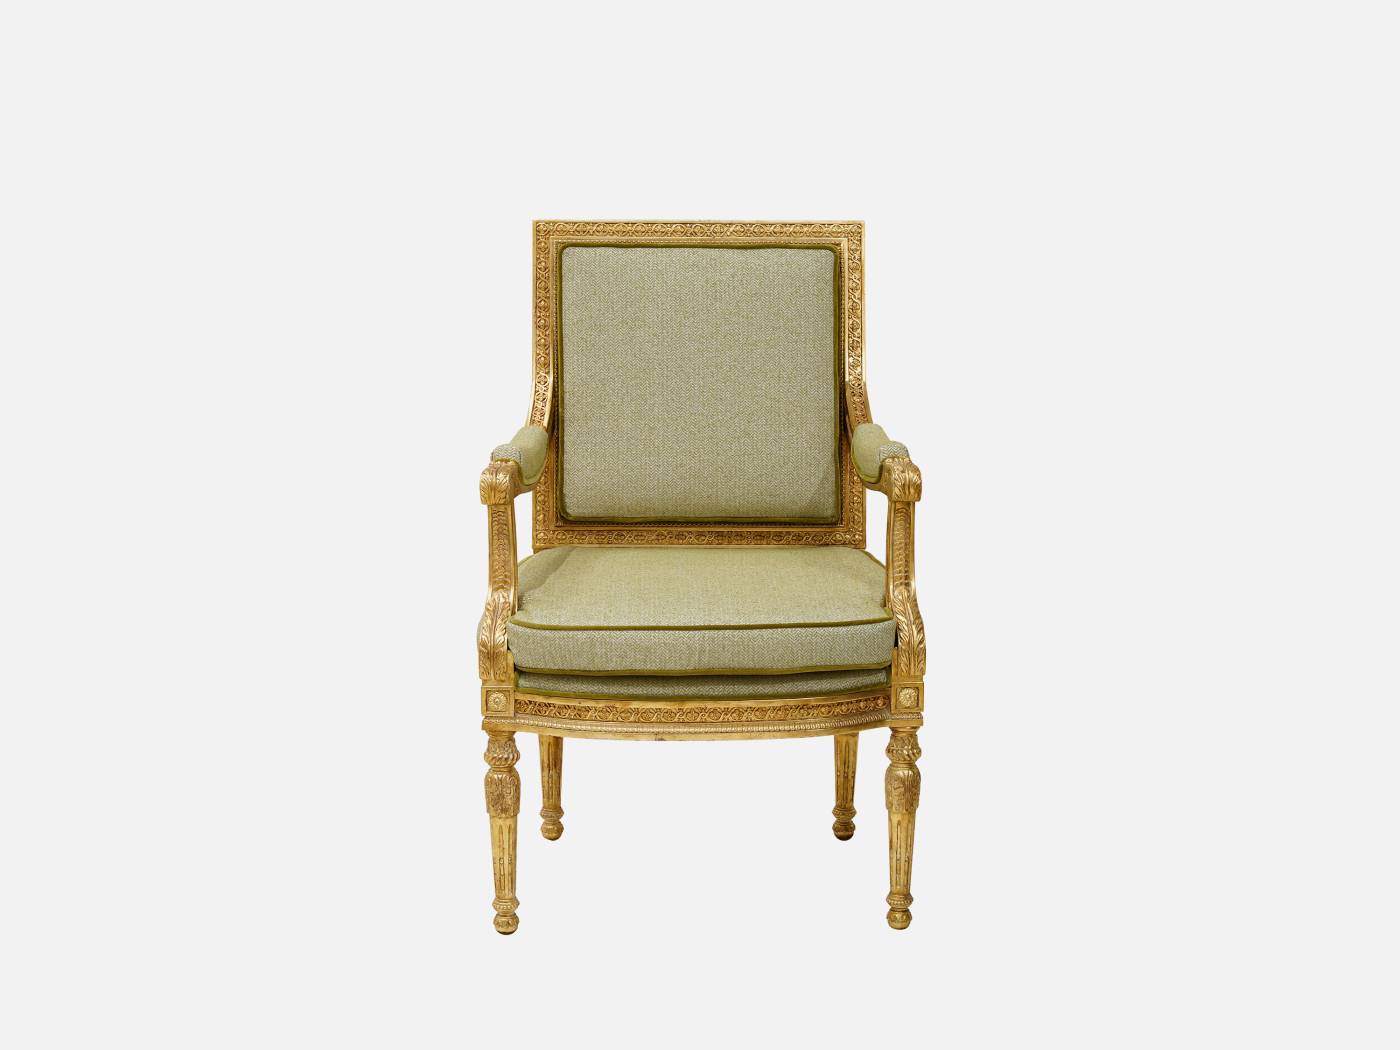 ART. 2206 - C.G. Capelletti quality furniture and timeless elegance with luxury made in italy contemporary Armchairs.